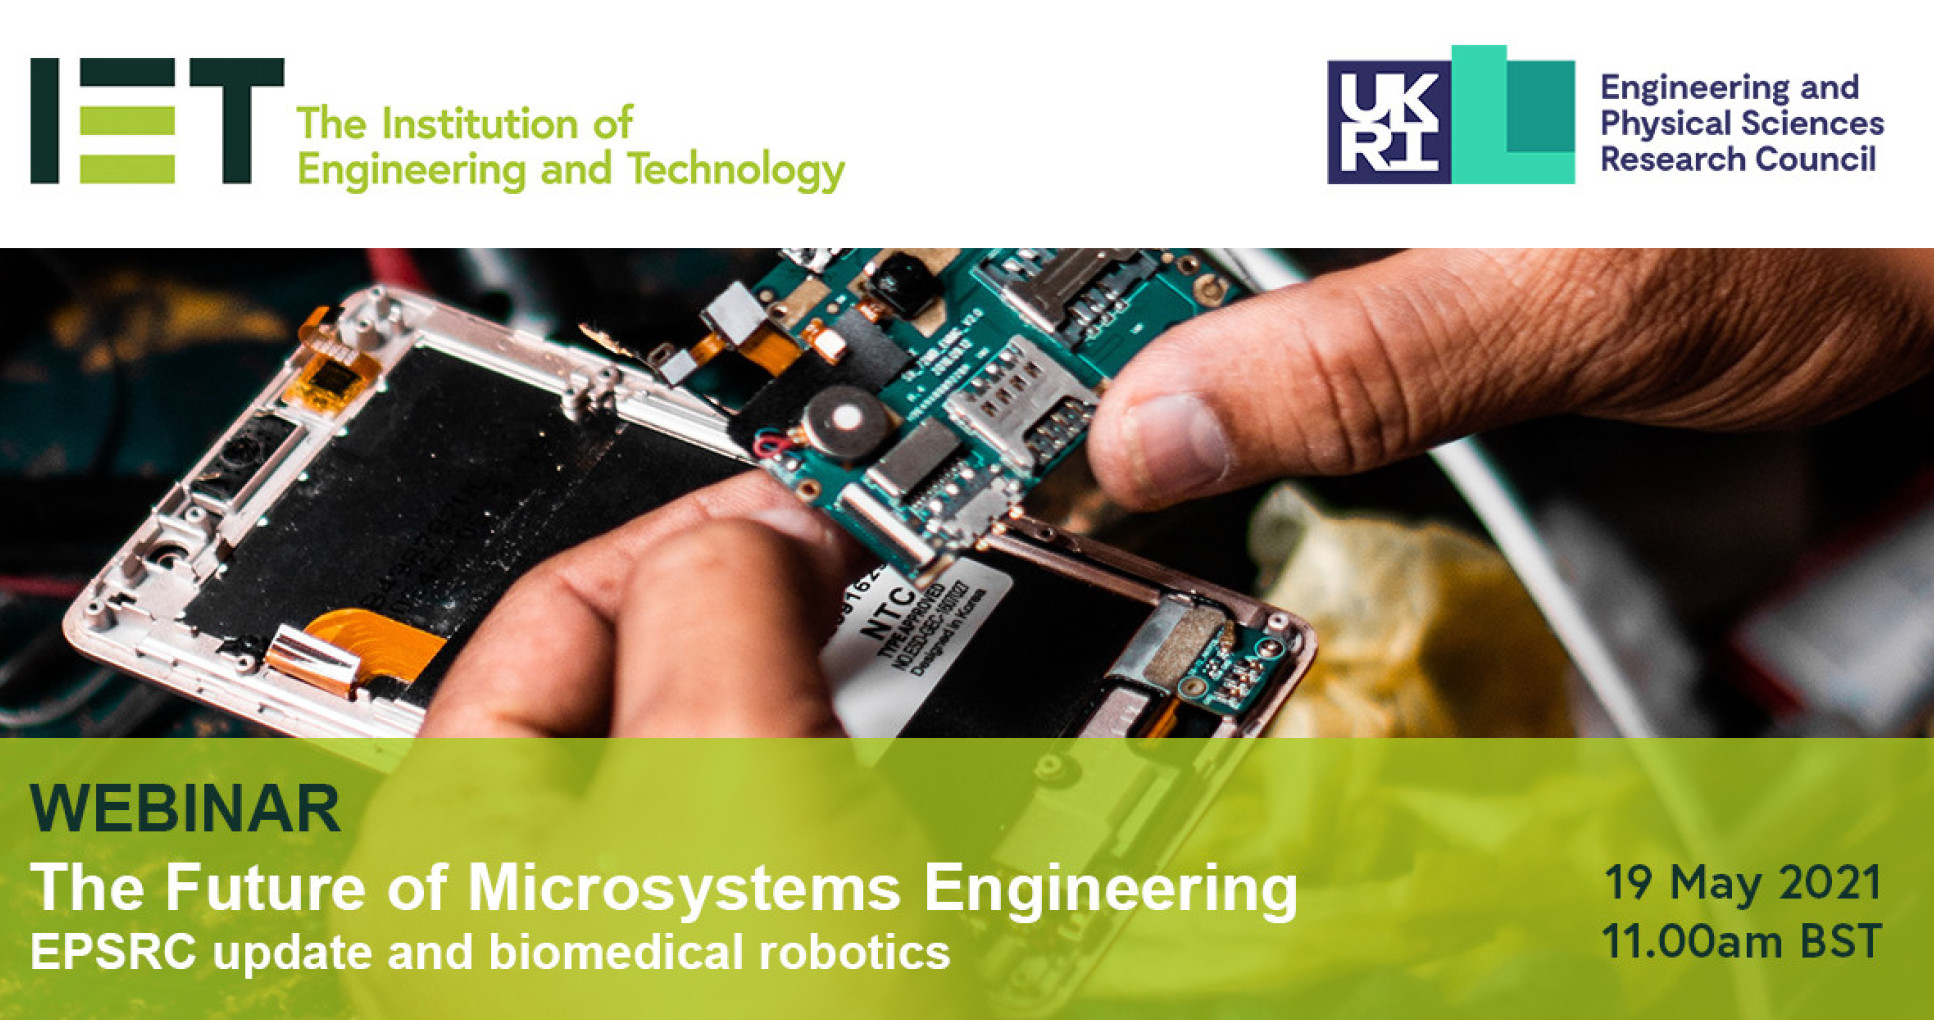 The Future of Microsystems Engineering: EPSRC update and biomedical robotics